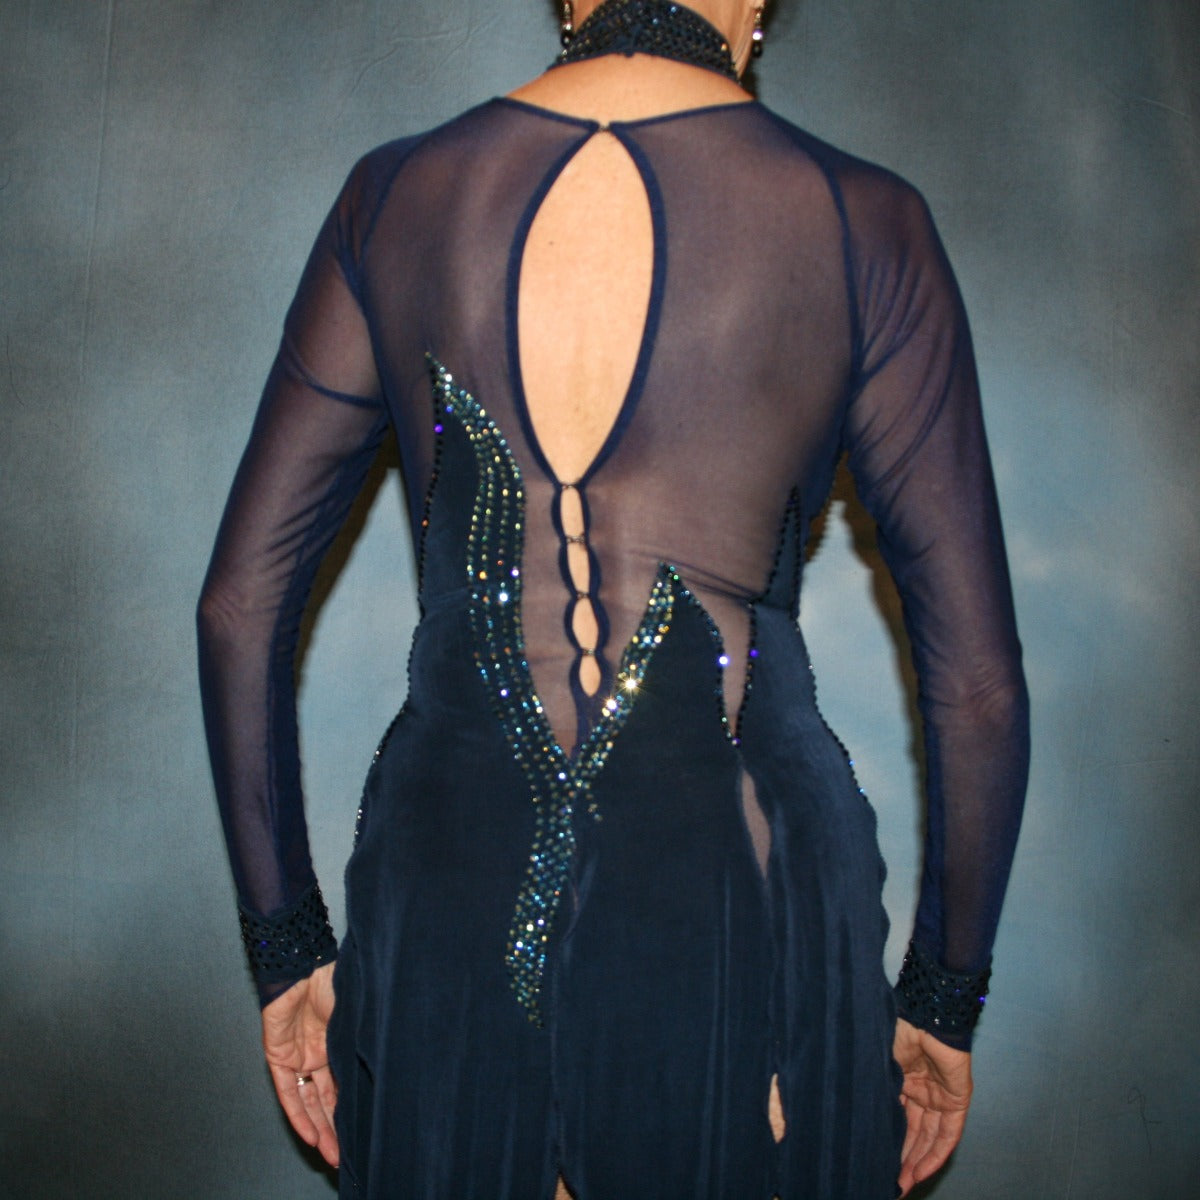 Crystal's creations close up back view of Navy blue Latin/rhythm dress was created in luxurious navy solid slinky & sheer mesh… embellished with montana(navy) & montana AB Swarovski rhinestone work. 